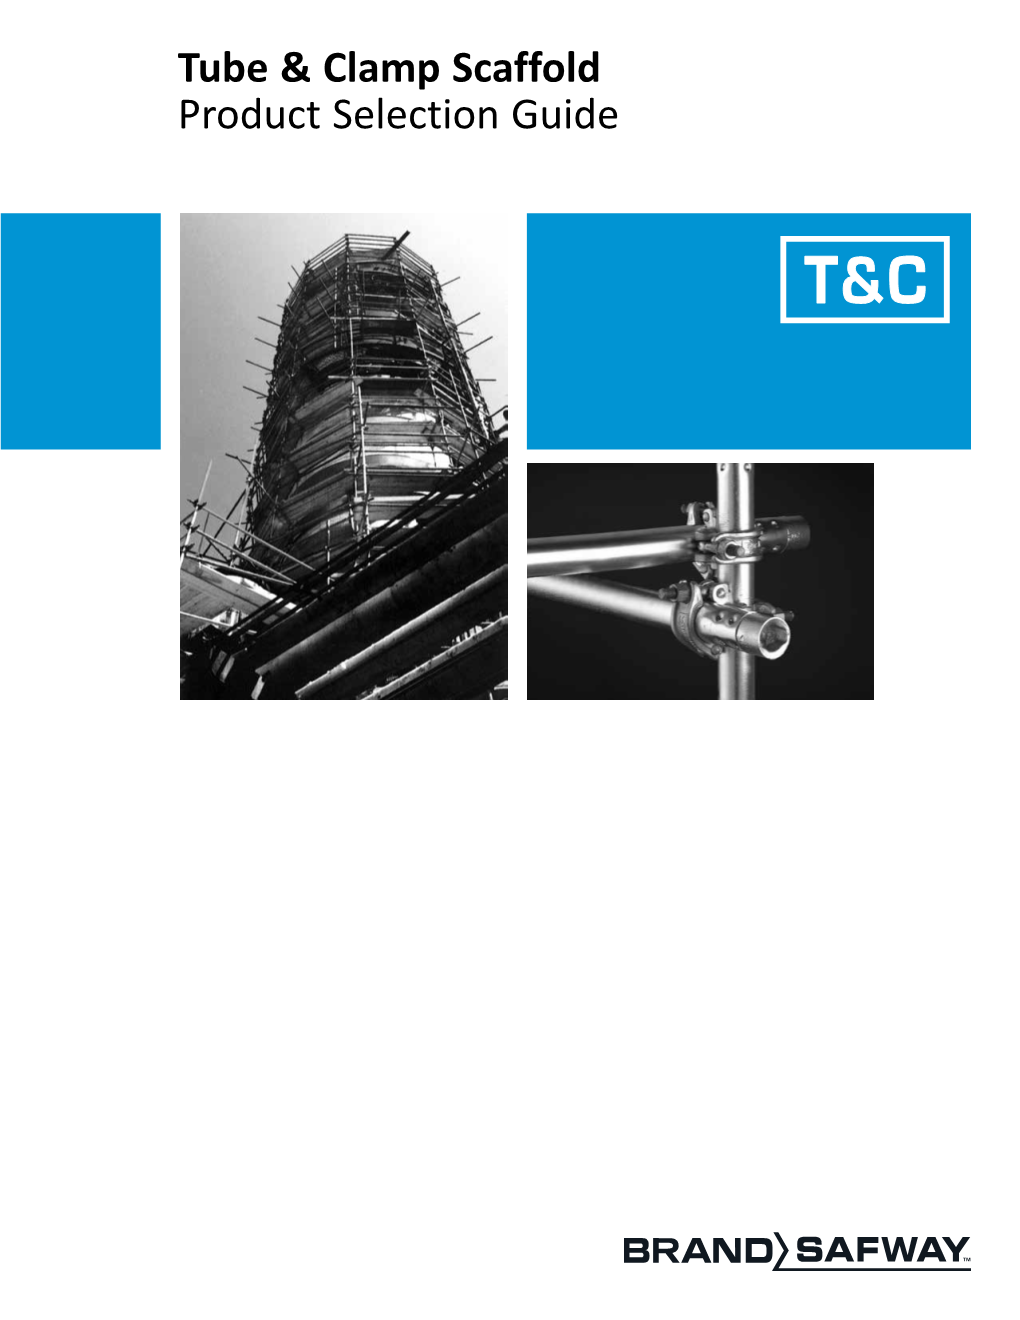 Tube & Clamp Scaffold Product Selection Guide